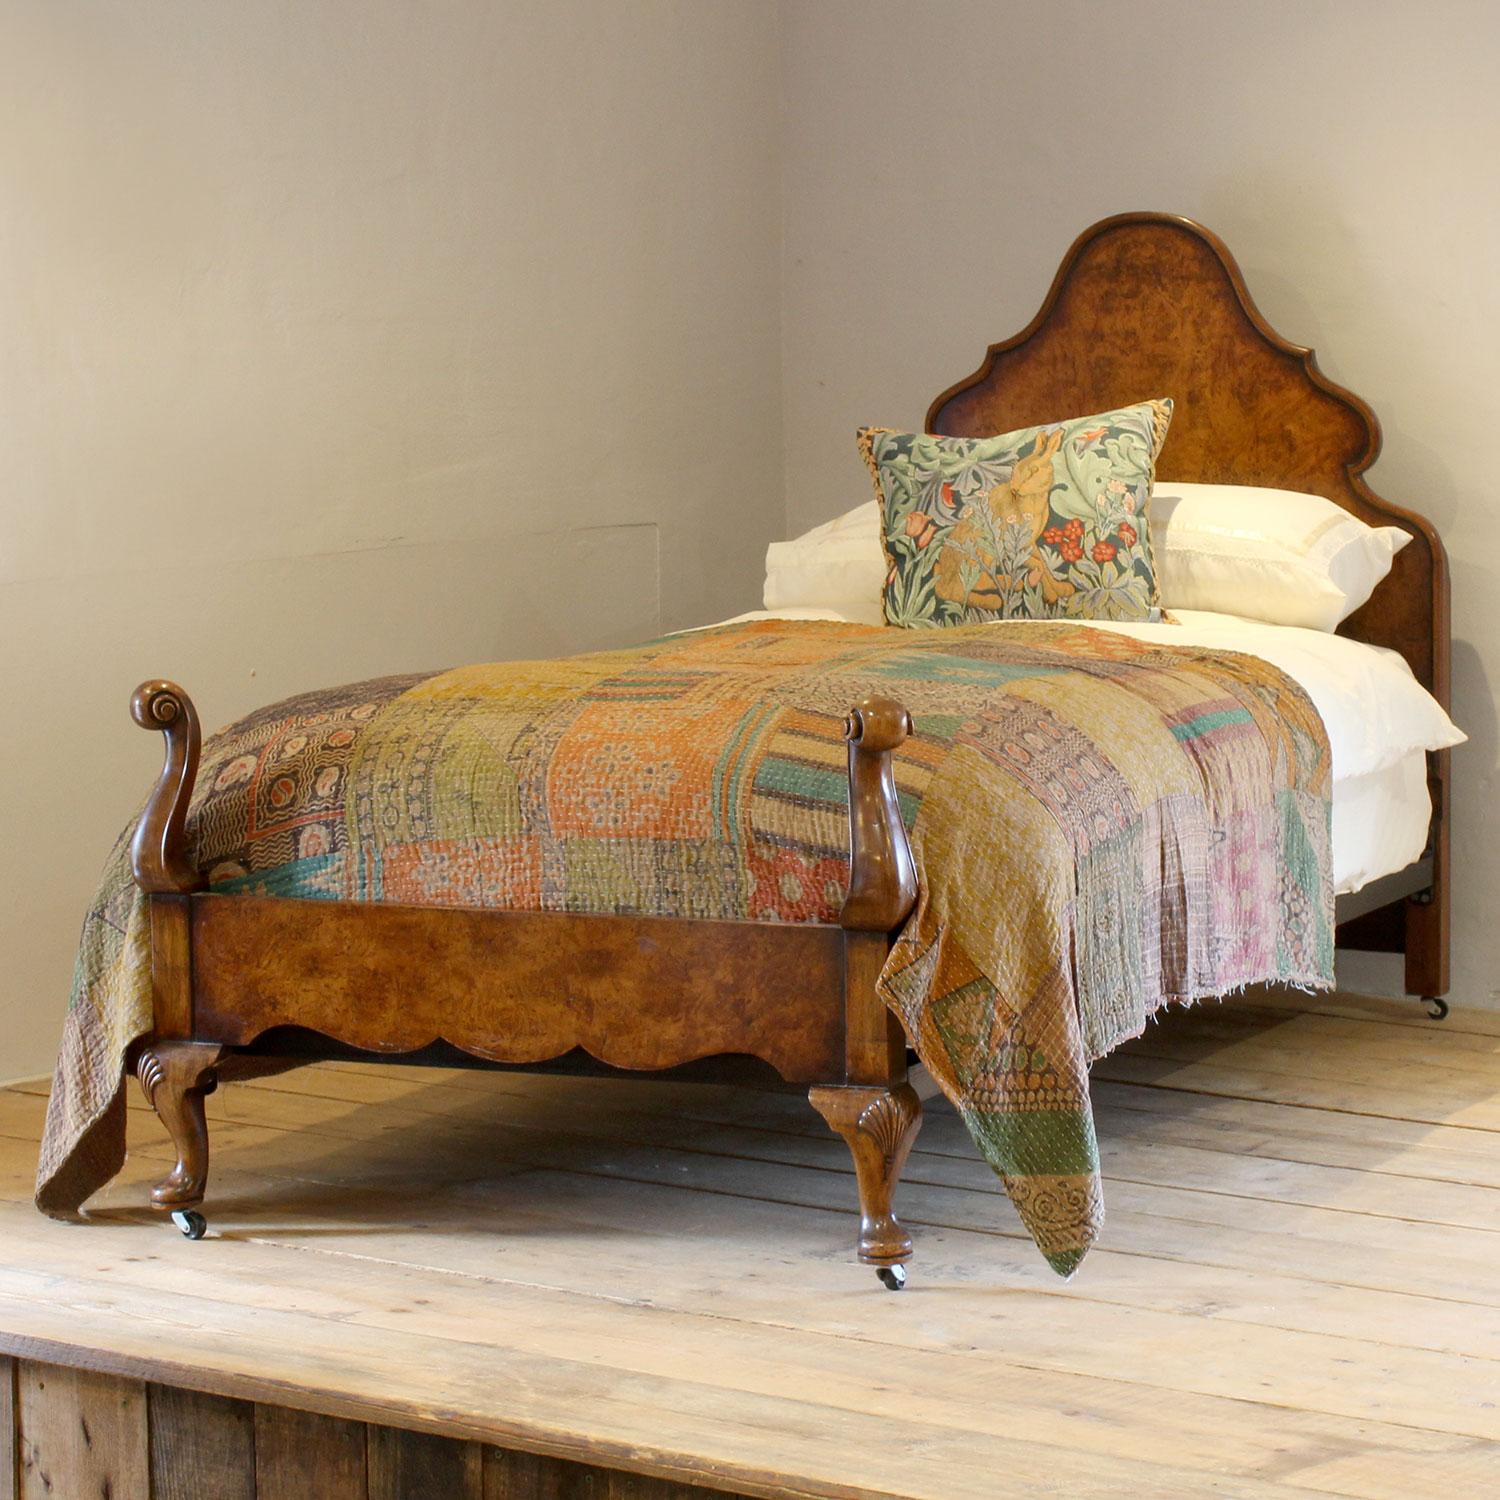 A Queen Anne style walnut bedstead with torchon feet and shaped backboard with veneered panels.

This bed accepts a standard UK single 36